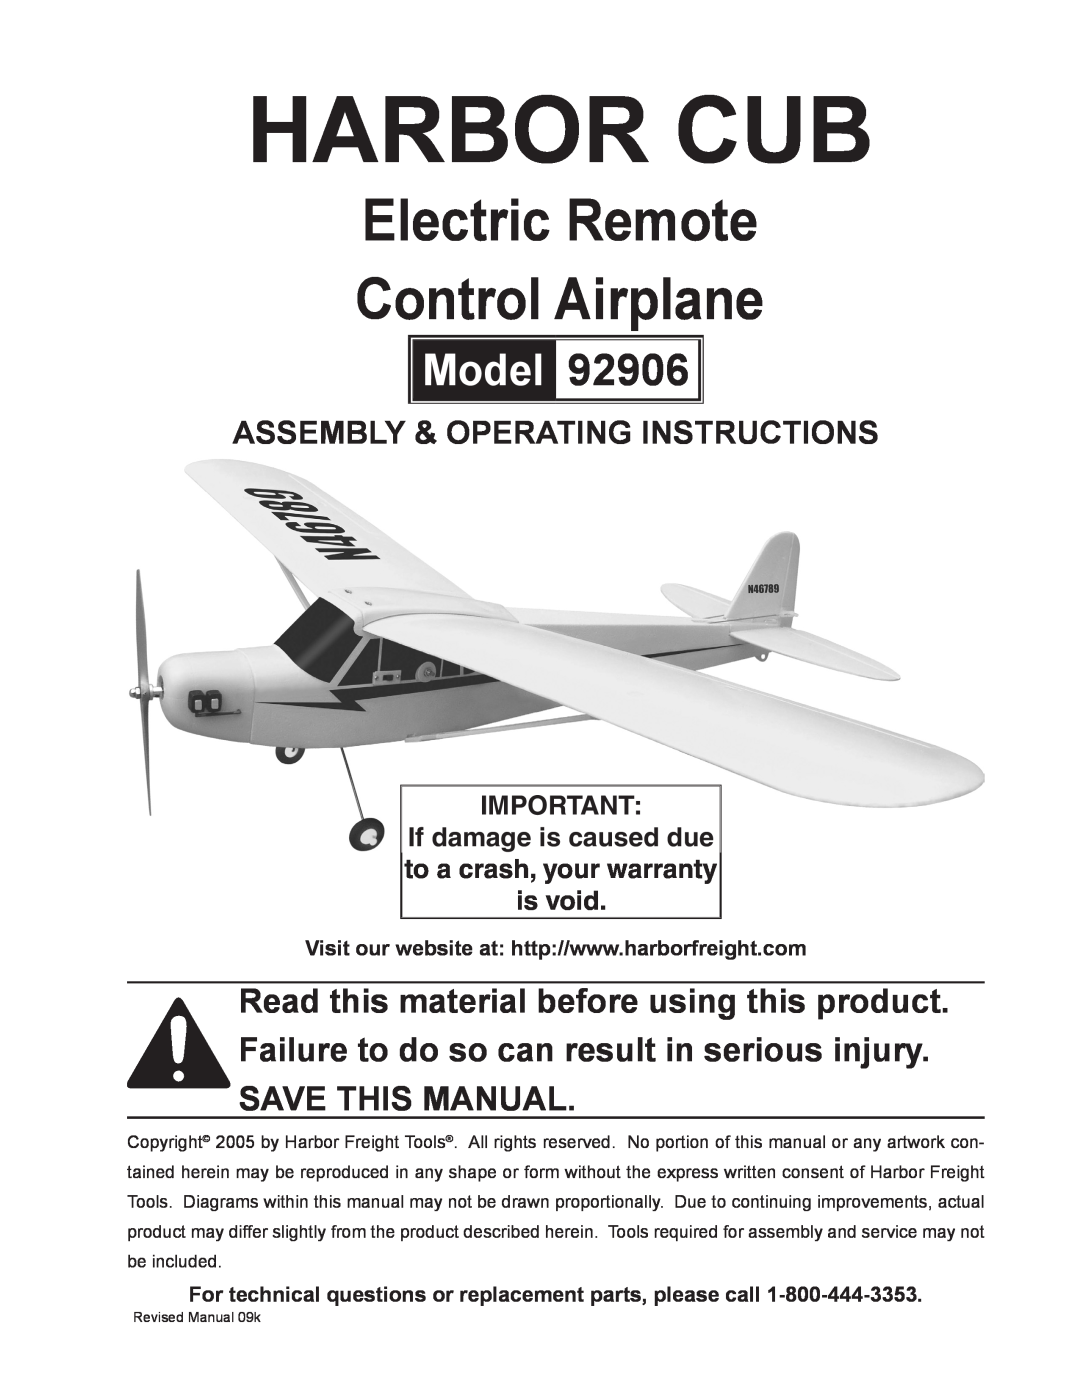 Harbor Freight Tools 92906 operating instructions harbor cub, Electric Remote Control Airplane, Model 